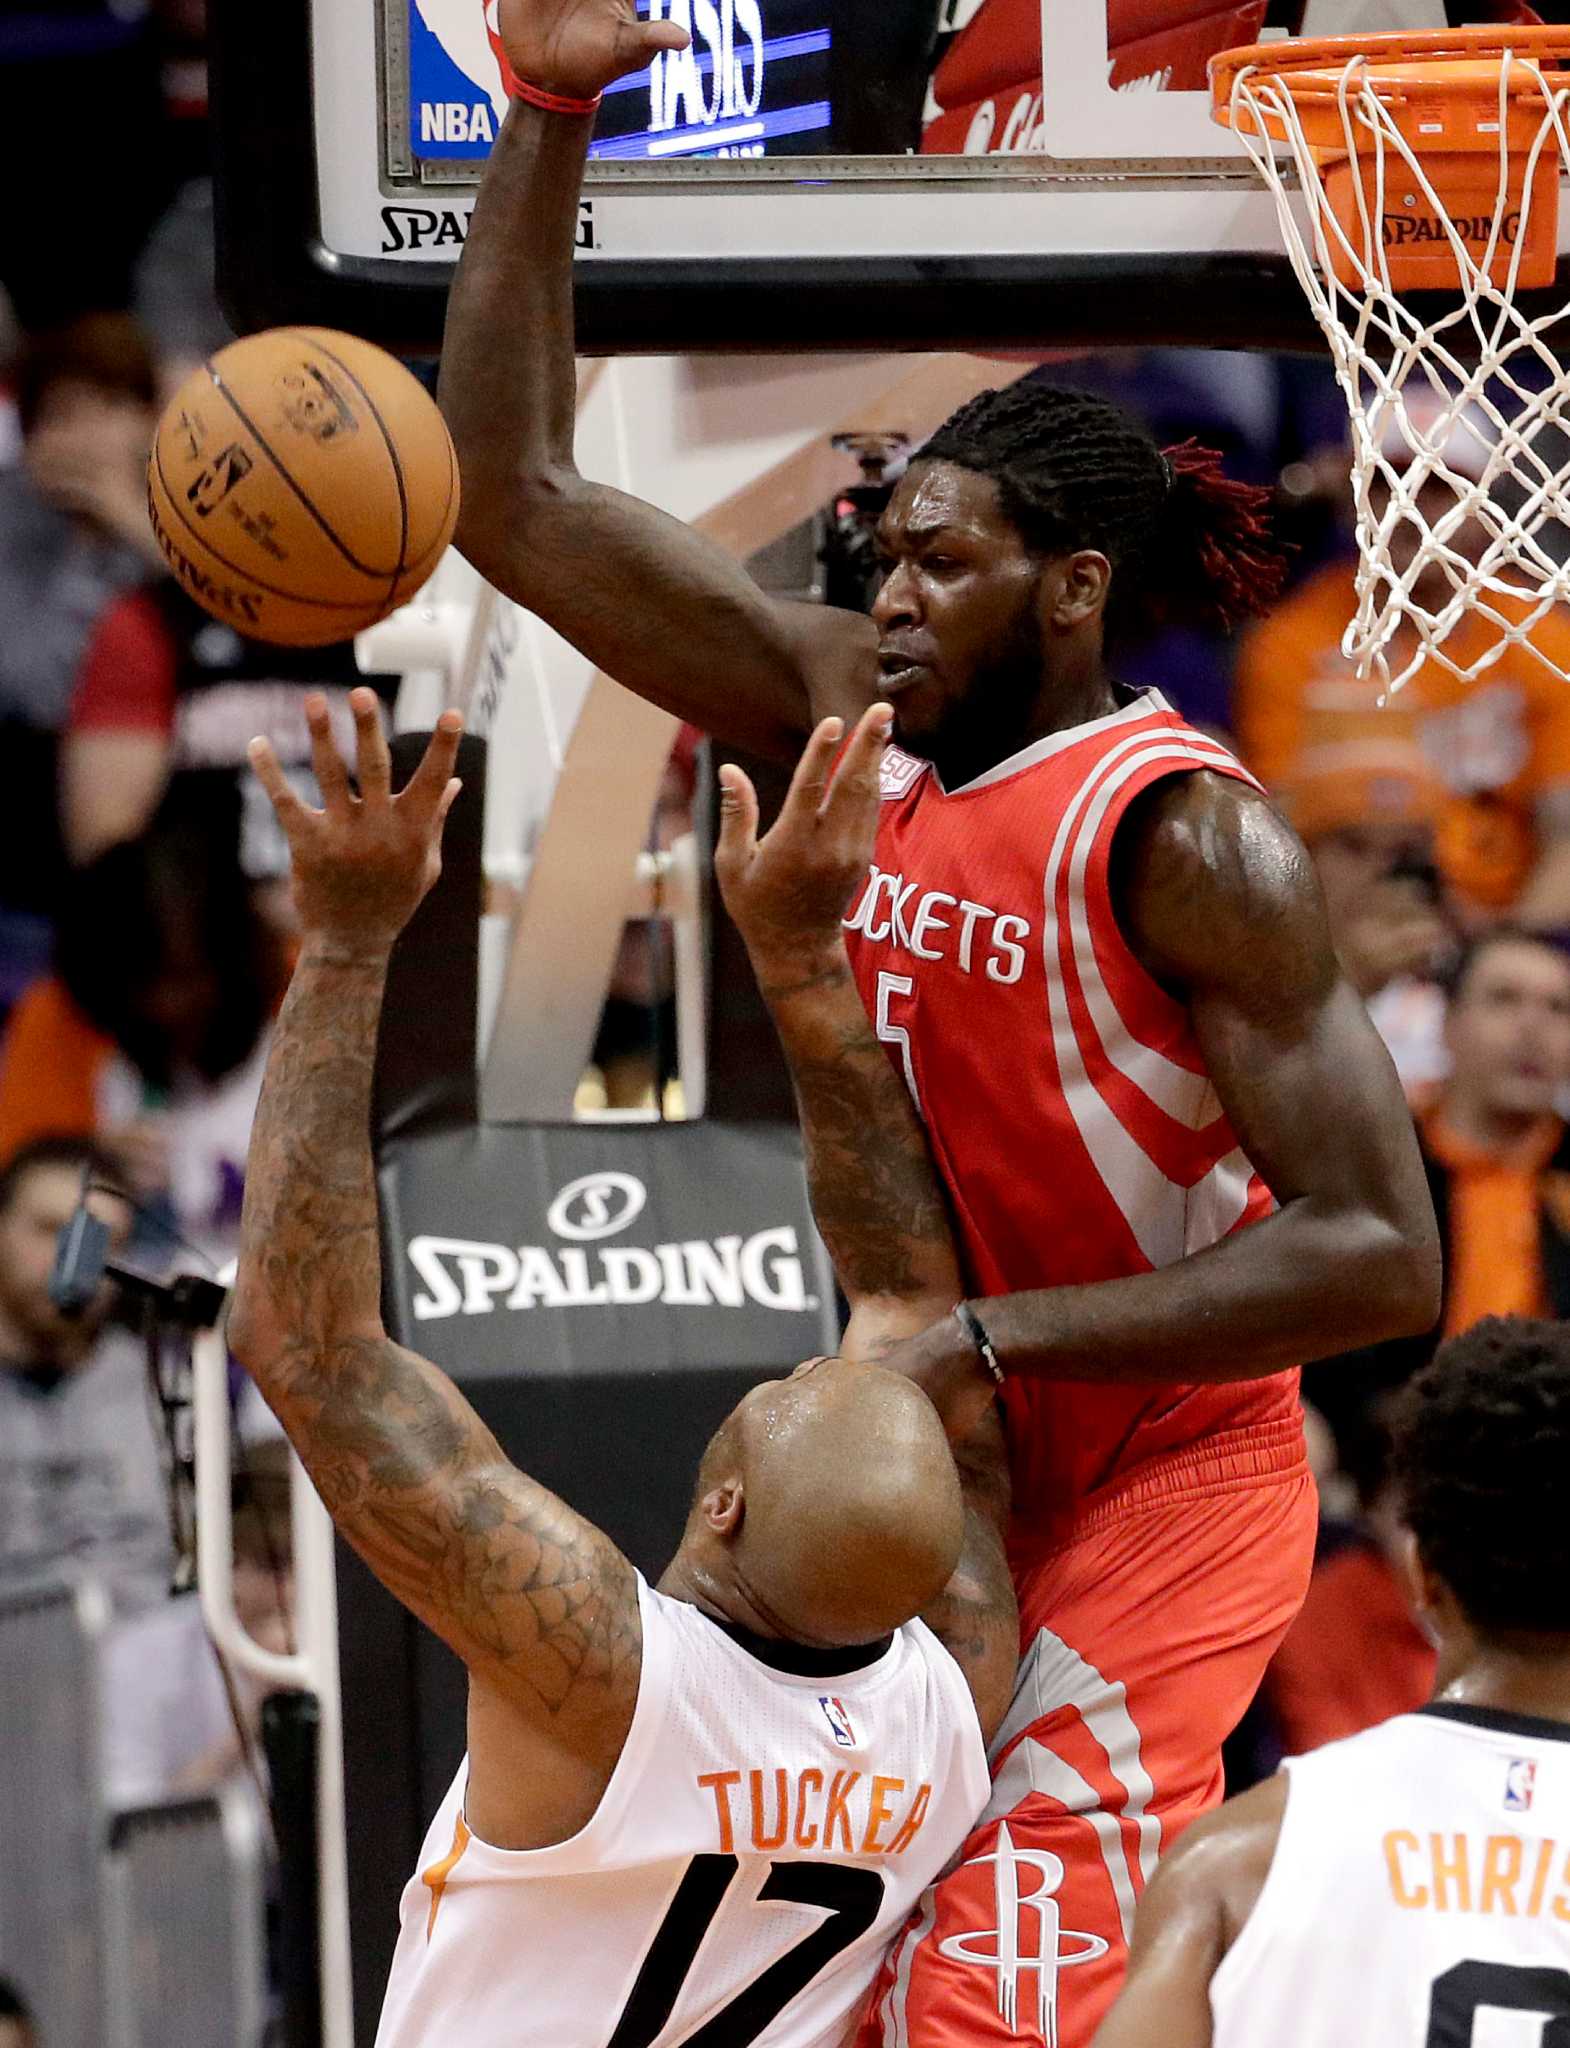 Without Clint Capela, Rockets try to pick up rebounding slack - Chron.com